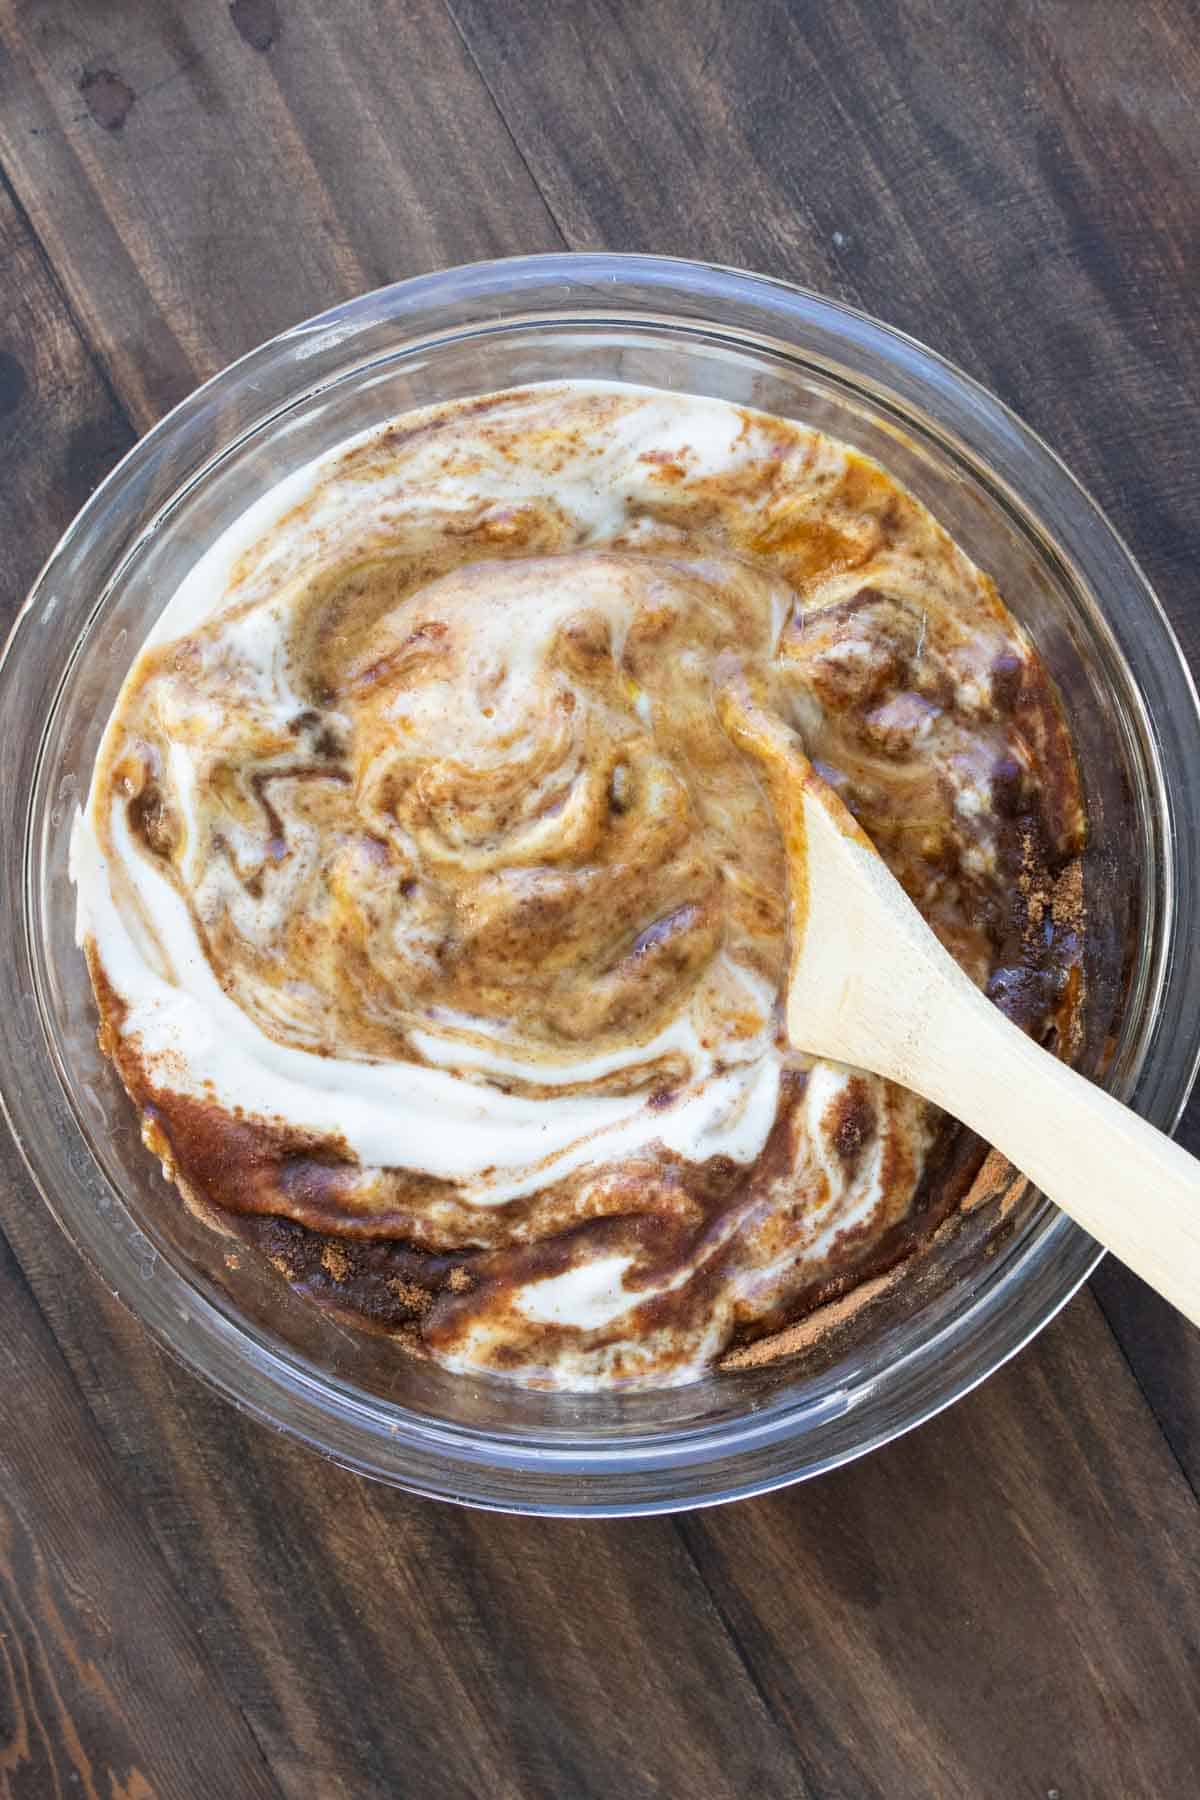 A wooden spoon mixing a brown caramel like batter into whipped cream.